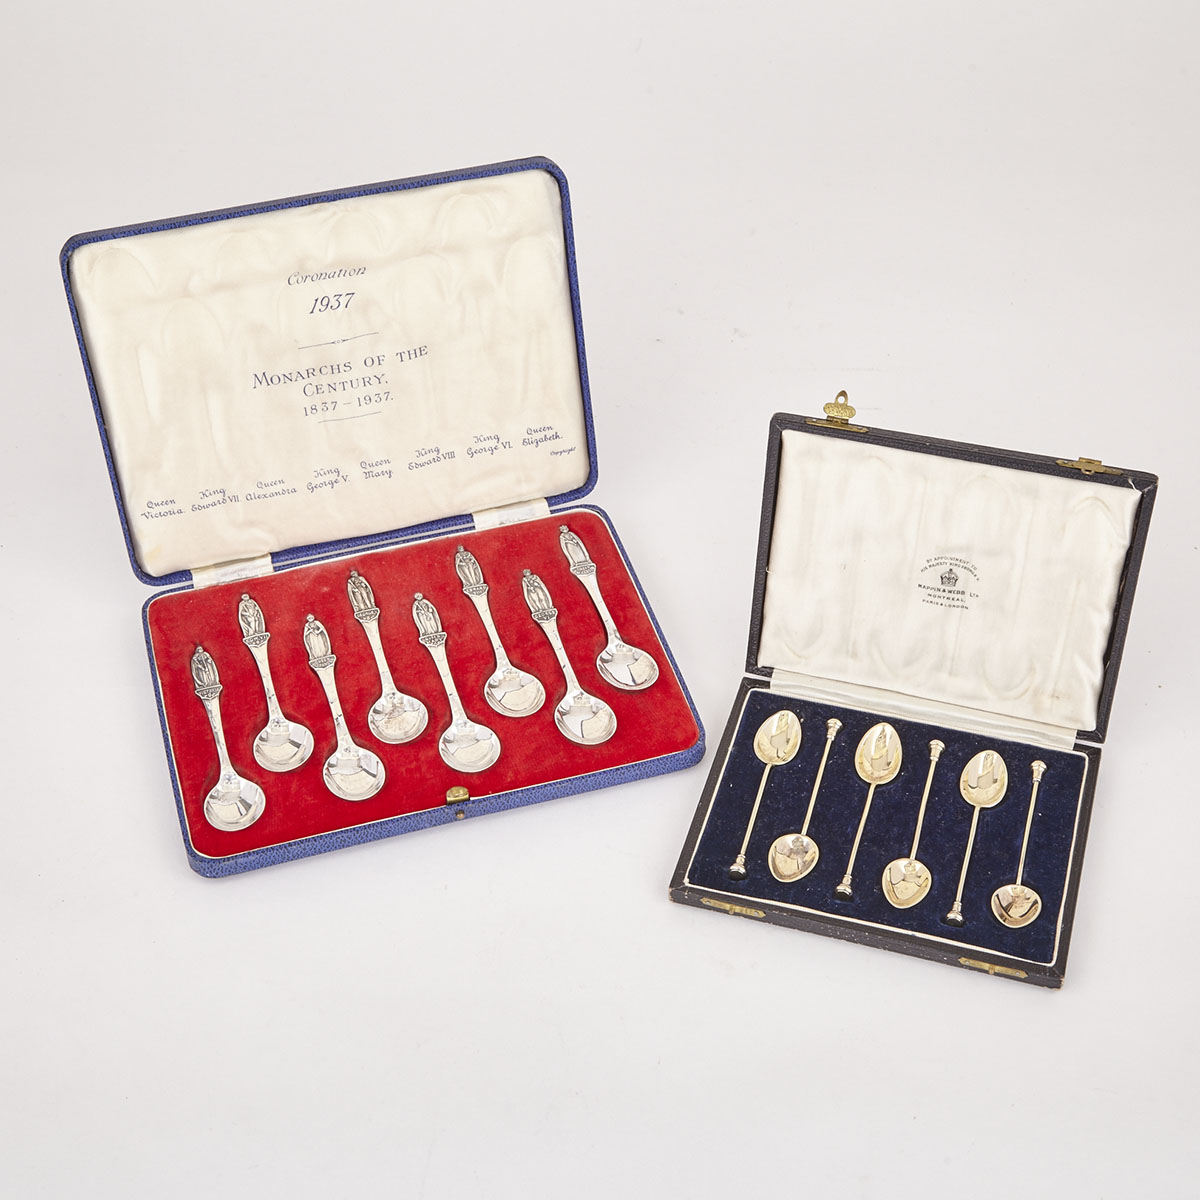 Eight English Silver ‘Monarchs of the Century’ Tea Spoons, Cooper Bros. & sons, Sheffield, 1936 and Six Silver-Gilt and Enamel Seal-Top Coffee Spoons, Barker Bros., Birmingham, 1939